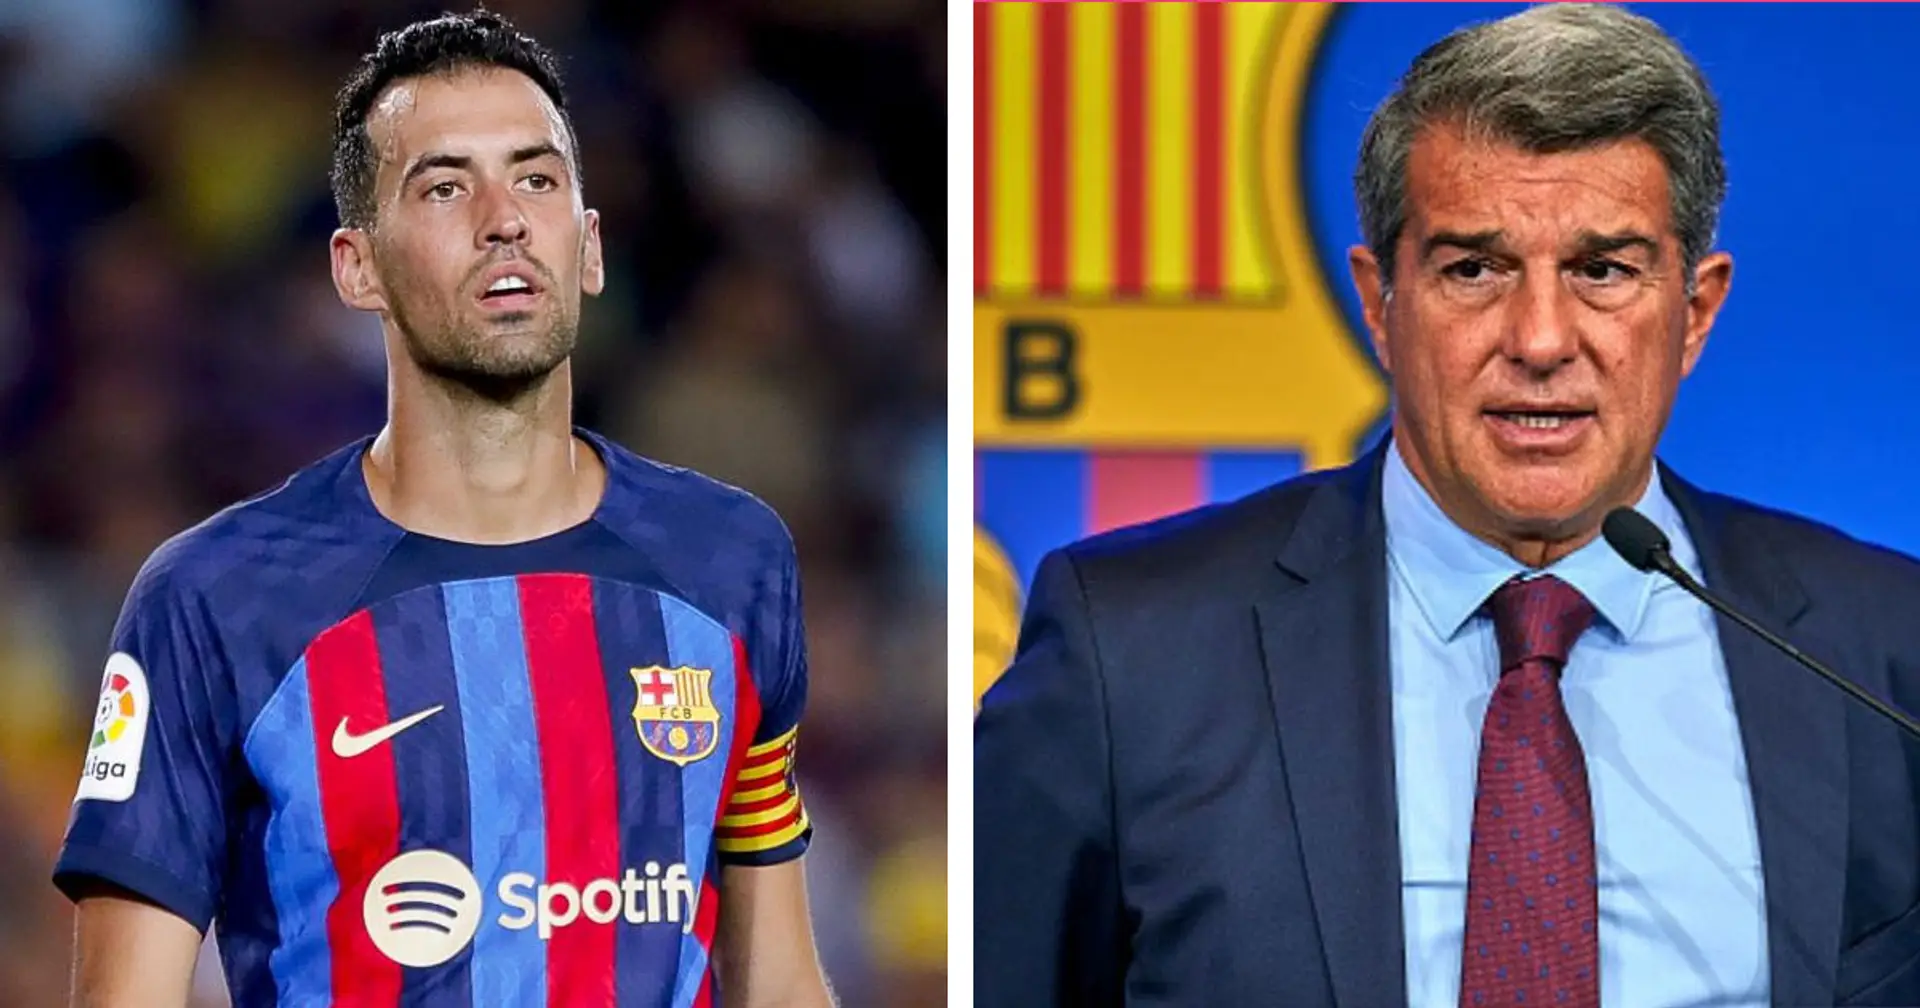 Barca 'open' to renewing Busquets contract – will let him make final decision